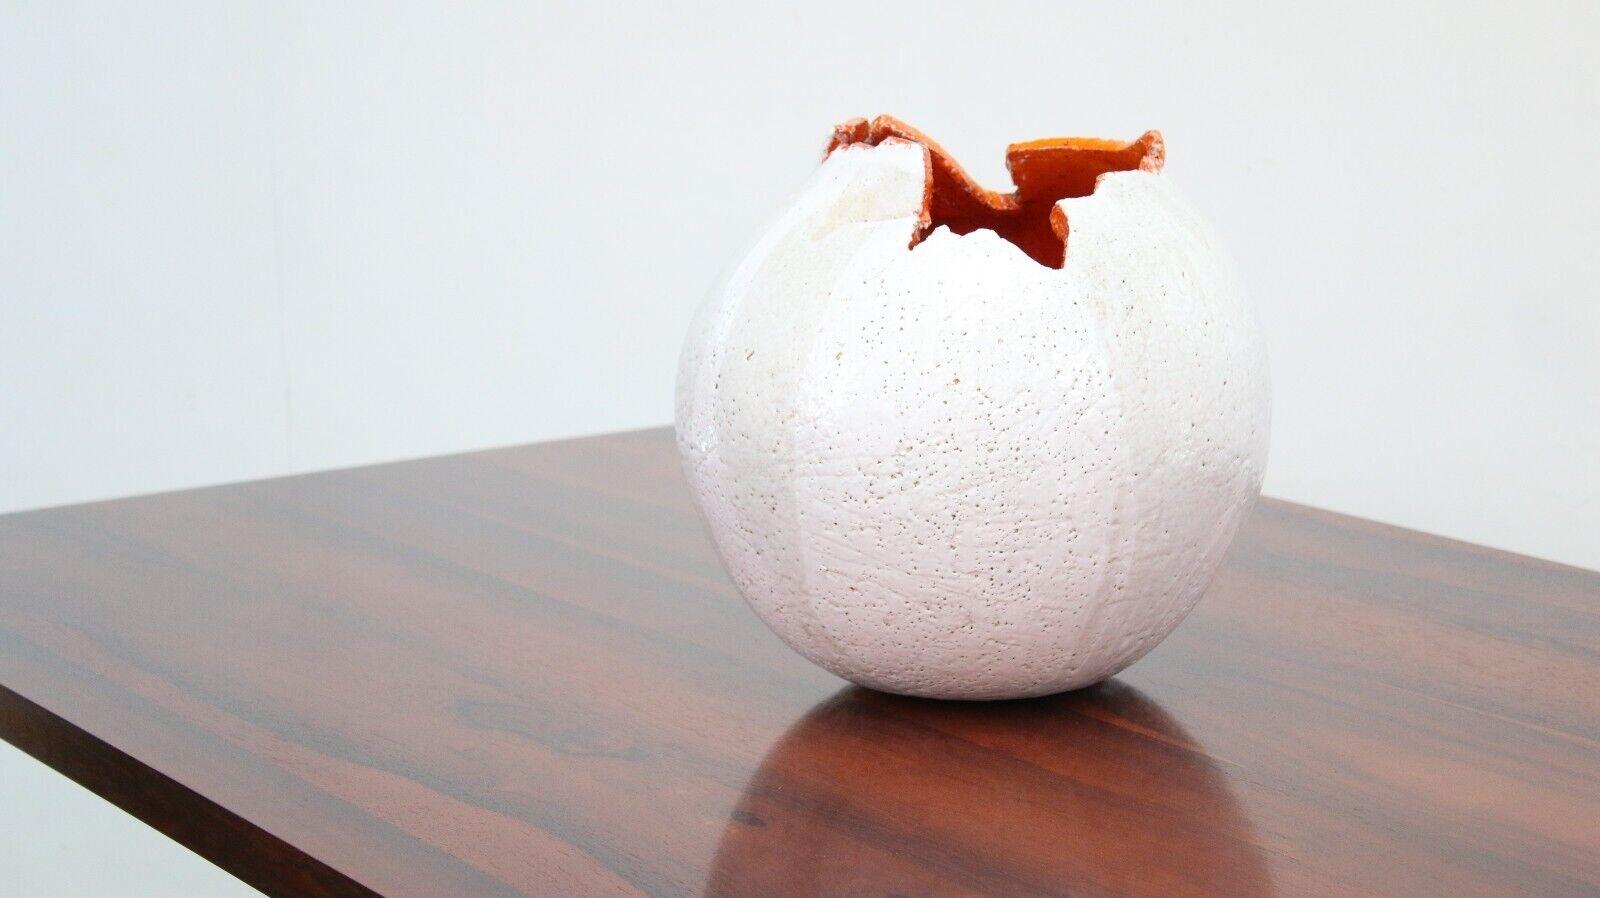 Egg-Shaped Display Vase Pot

This vase is an unusual piece of art that makes a great conversation starter. The vase is curved, with an abstract shape and raised detailing. 

It's crafted from white-glazed pottery and has an attractive orange